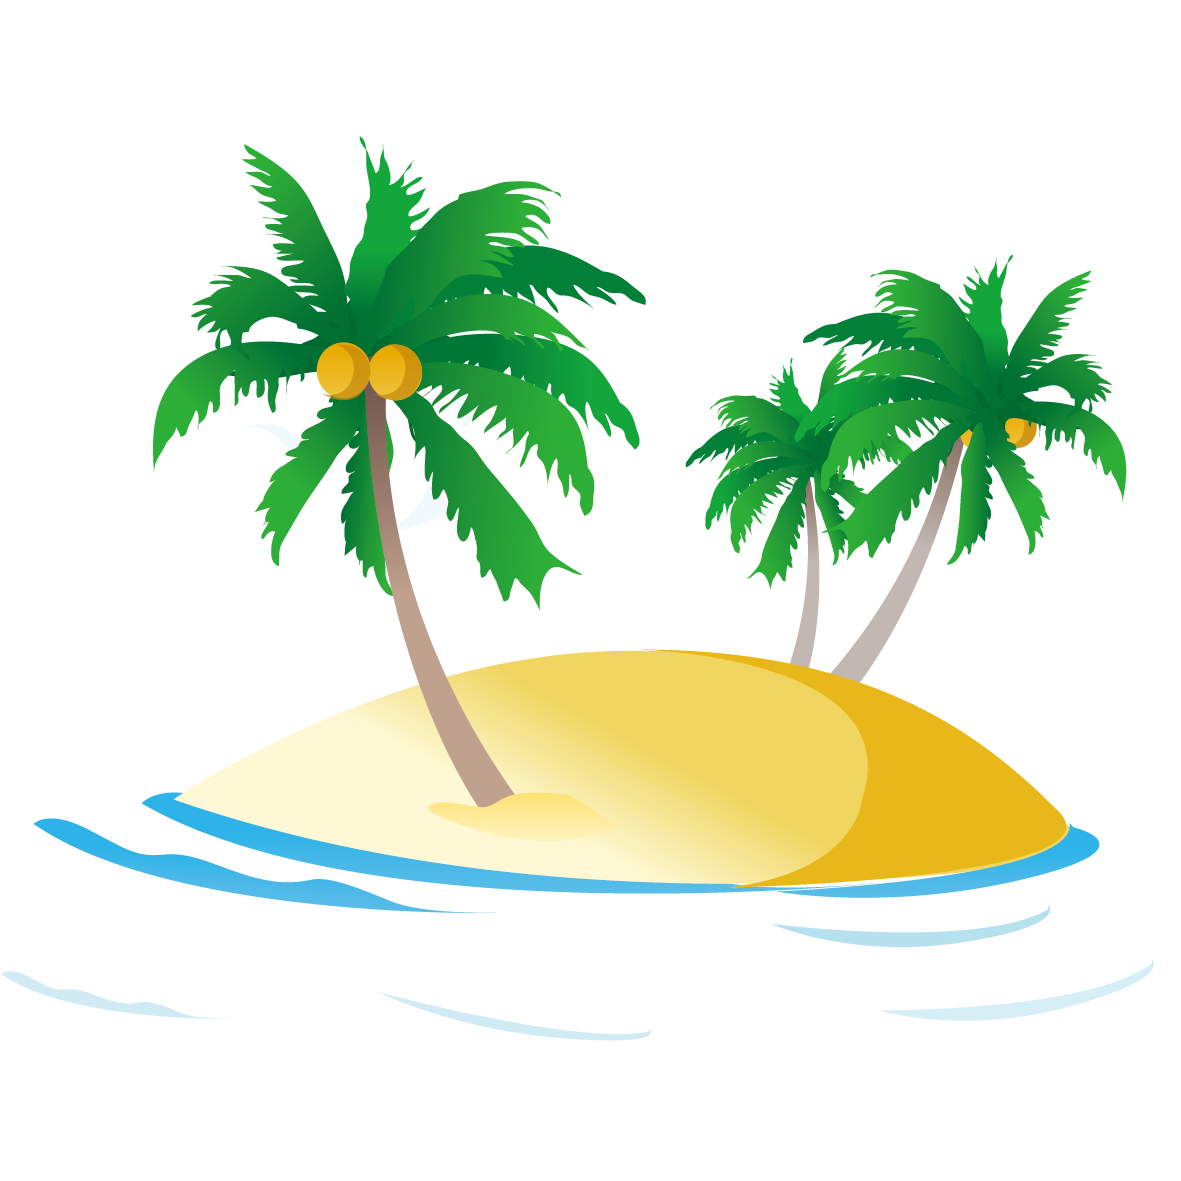 Sea ocean royalty free. Clipart wave palm tree